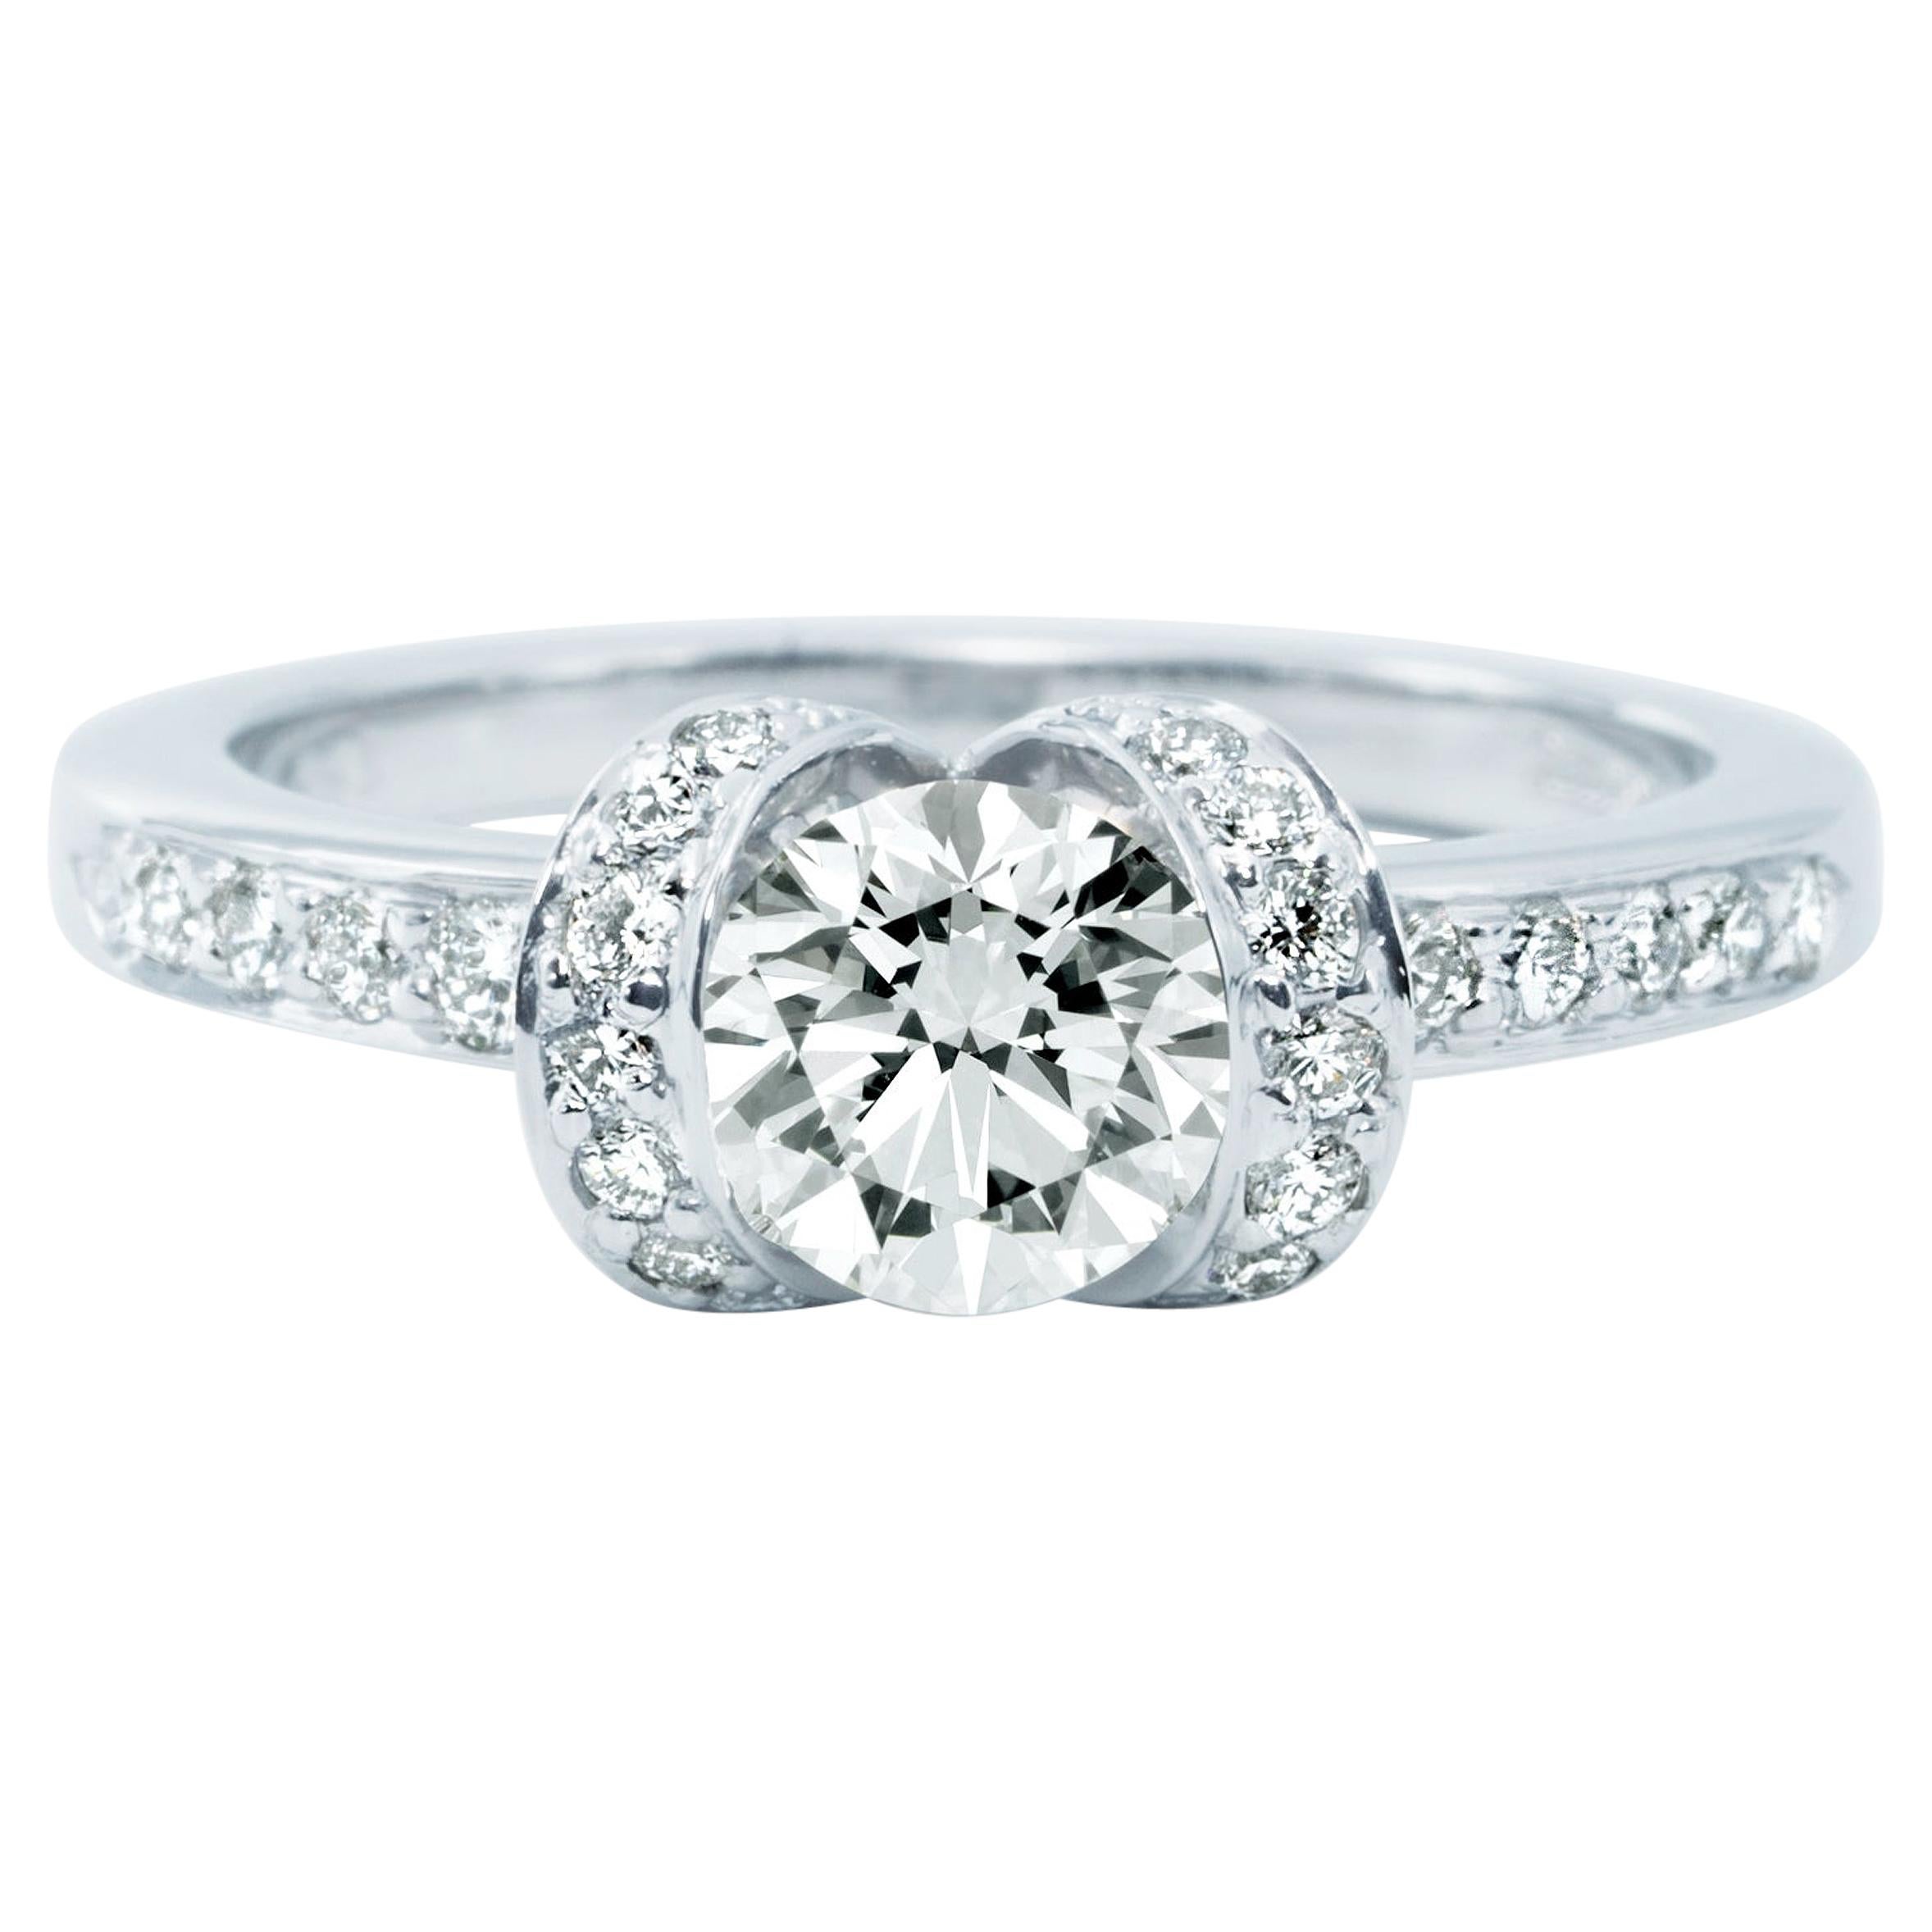 Tiffany & Co. Ribbon Engagement Ring with .72 Carat Round Centre in Platinum